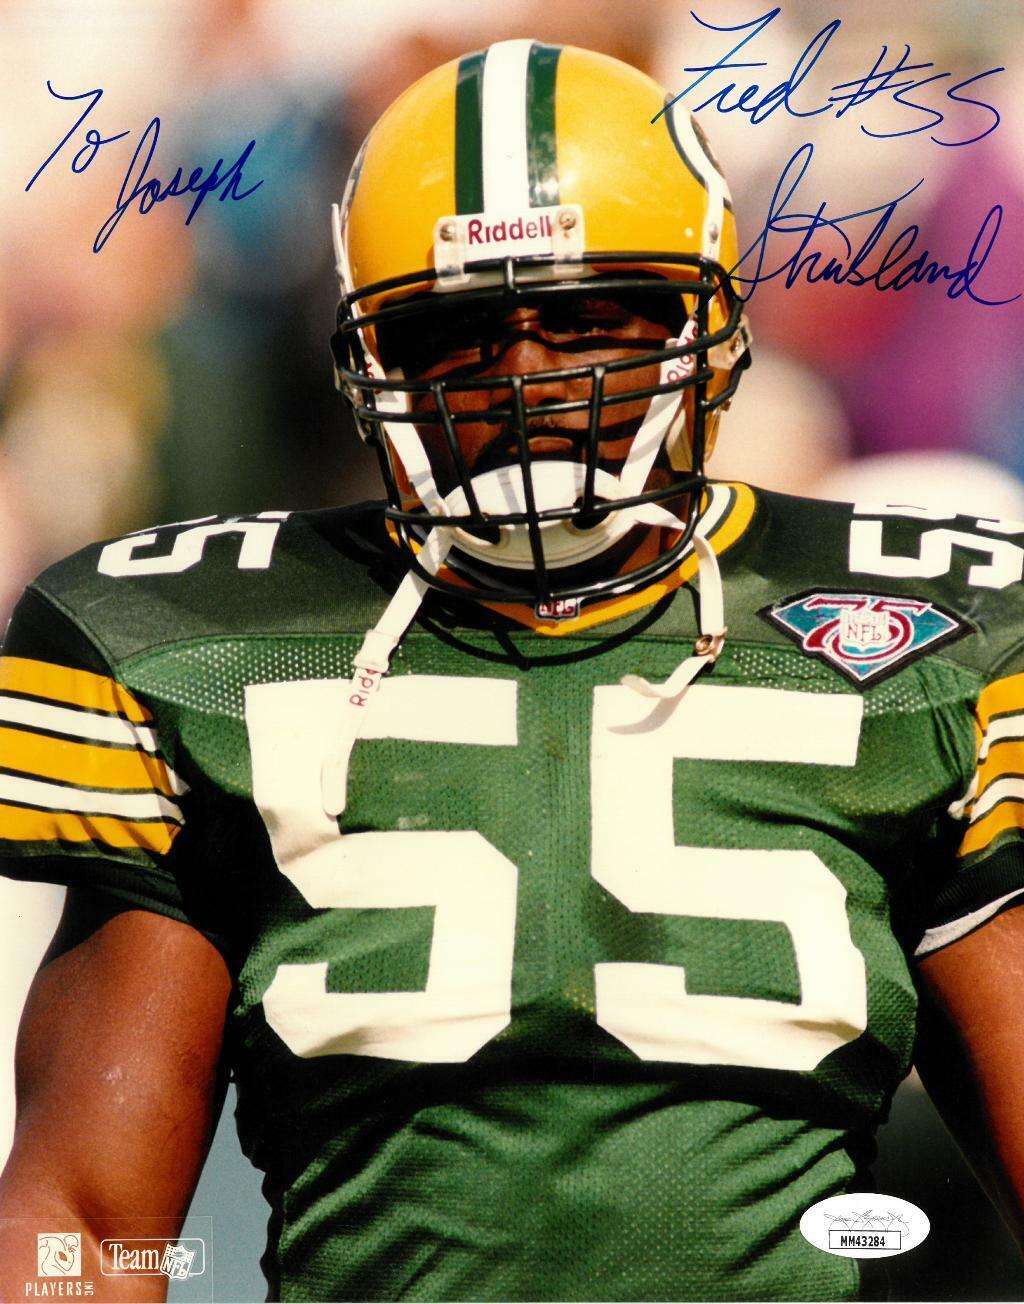 Fred Strickland Signed Green Bay Packers Autographed 8x10 Photo Poster painting JSA #MM43284